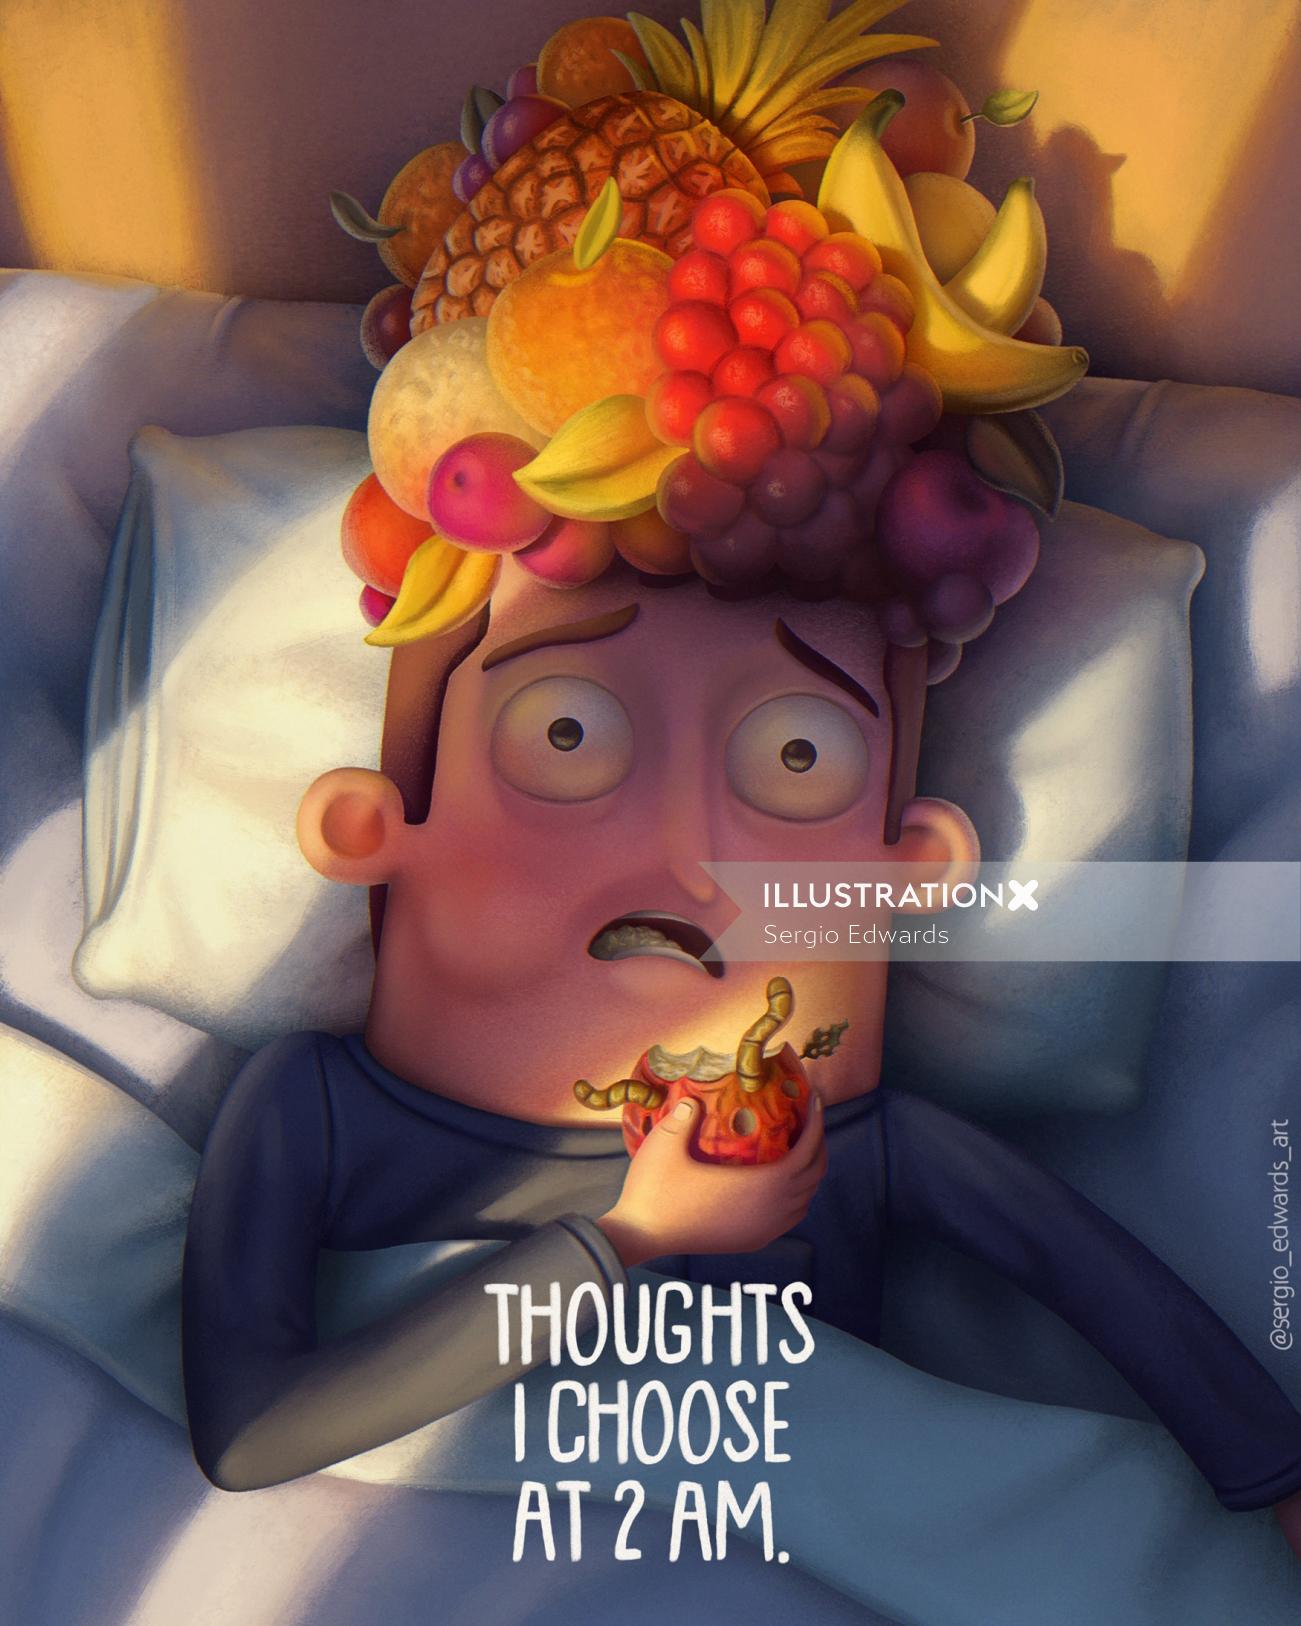 Man thoughts filled with fruits